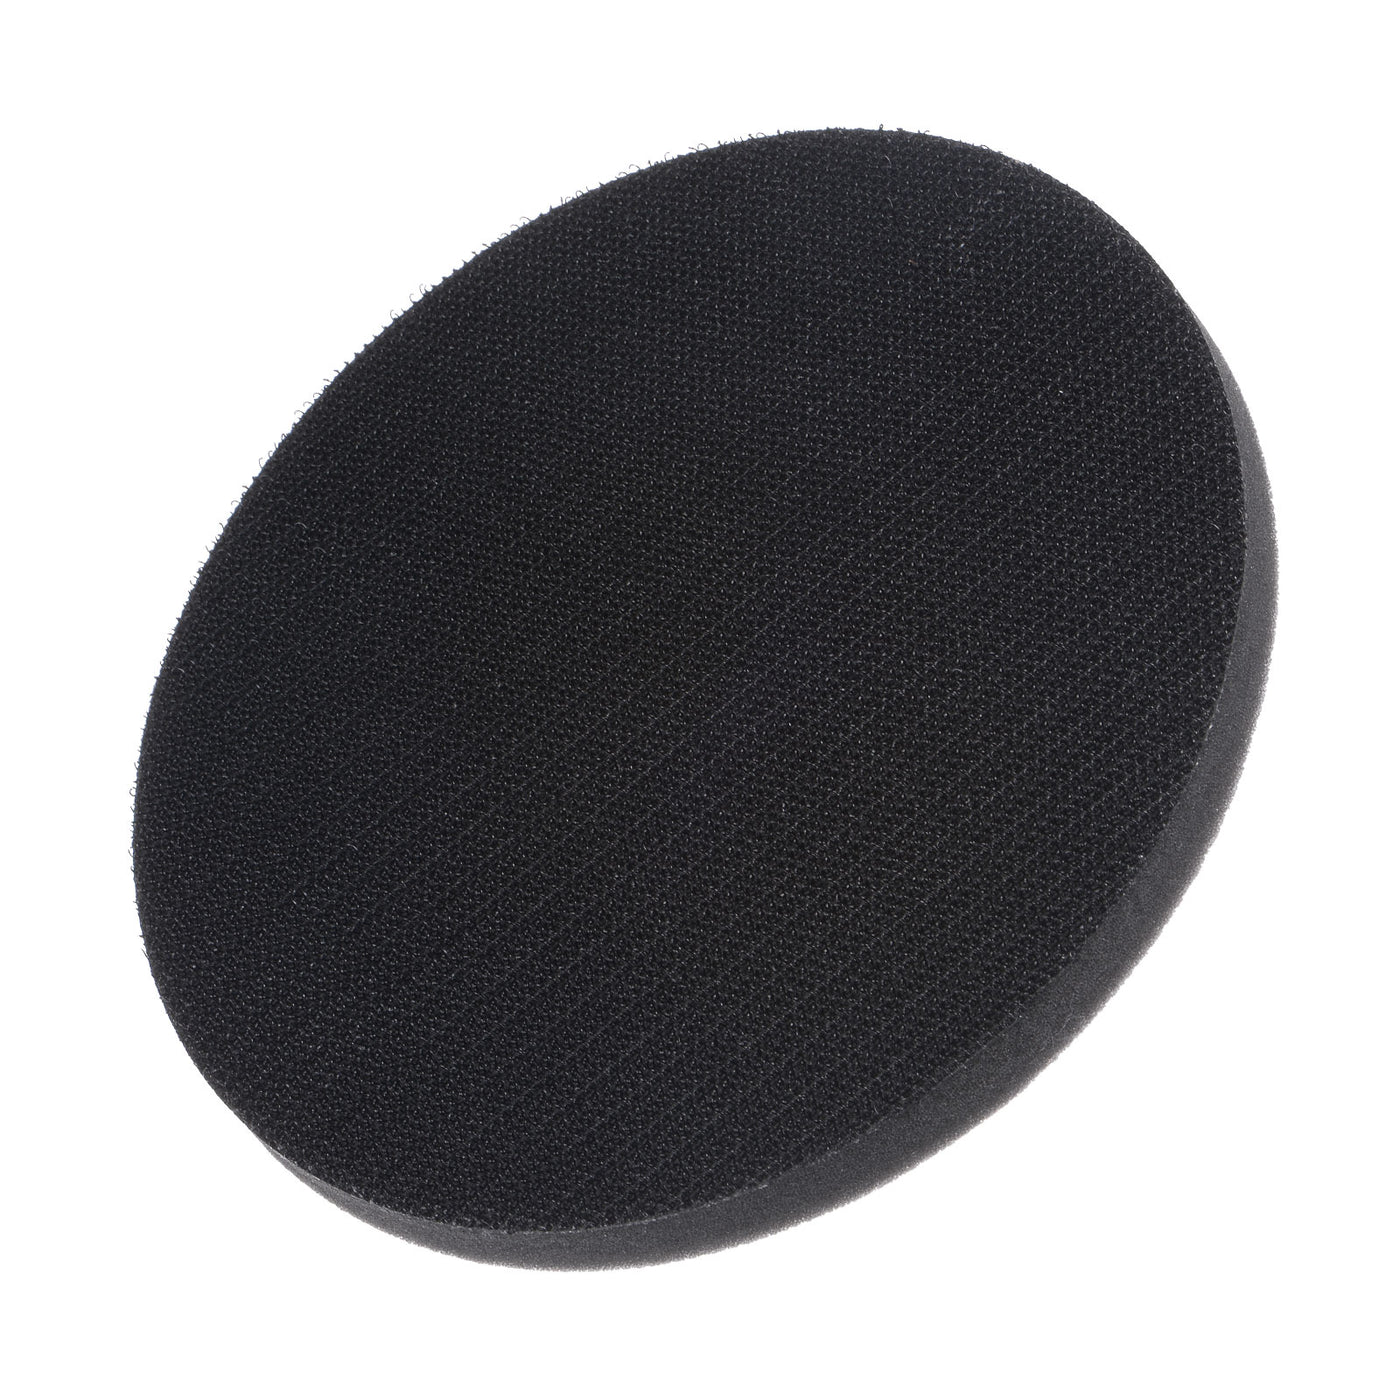 uxcell Uxcell 6 Inch Sponge Interface Pad Soft Density Hook and Loop Cushion Buffer Backing Pad for Electric Sander